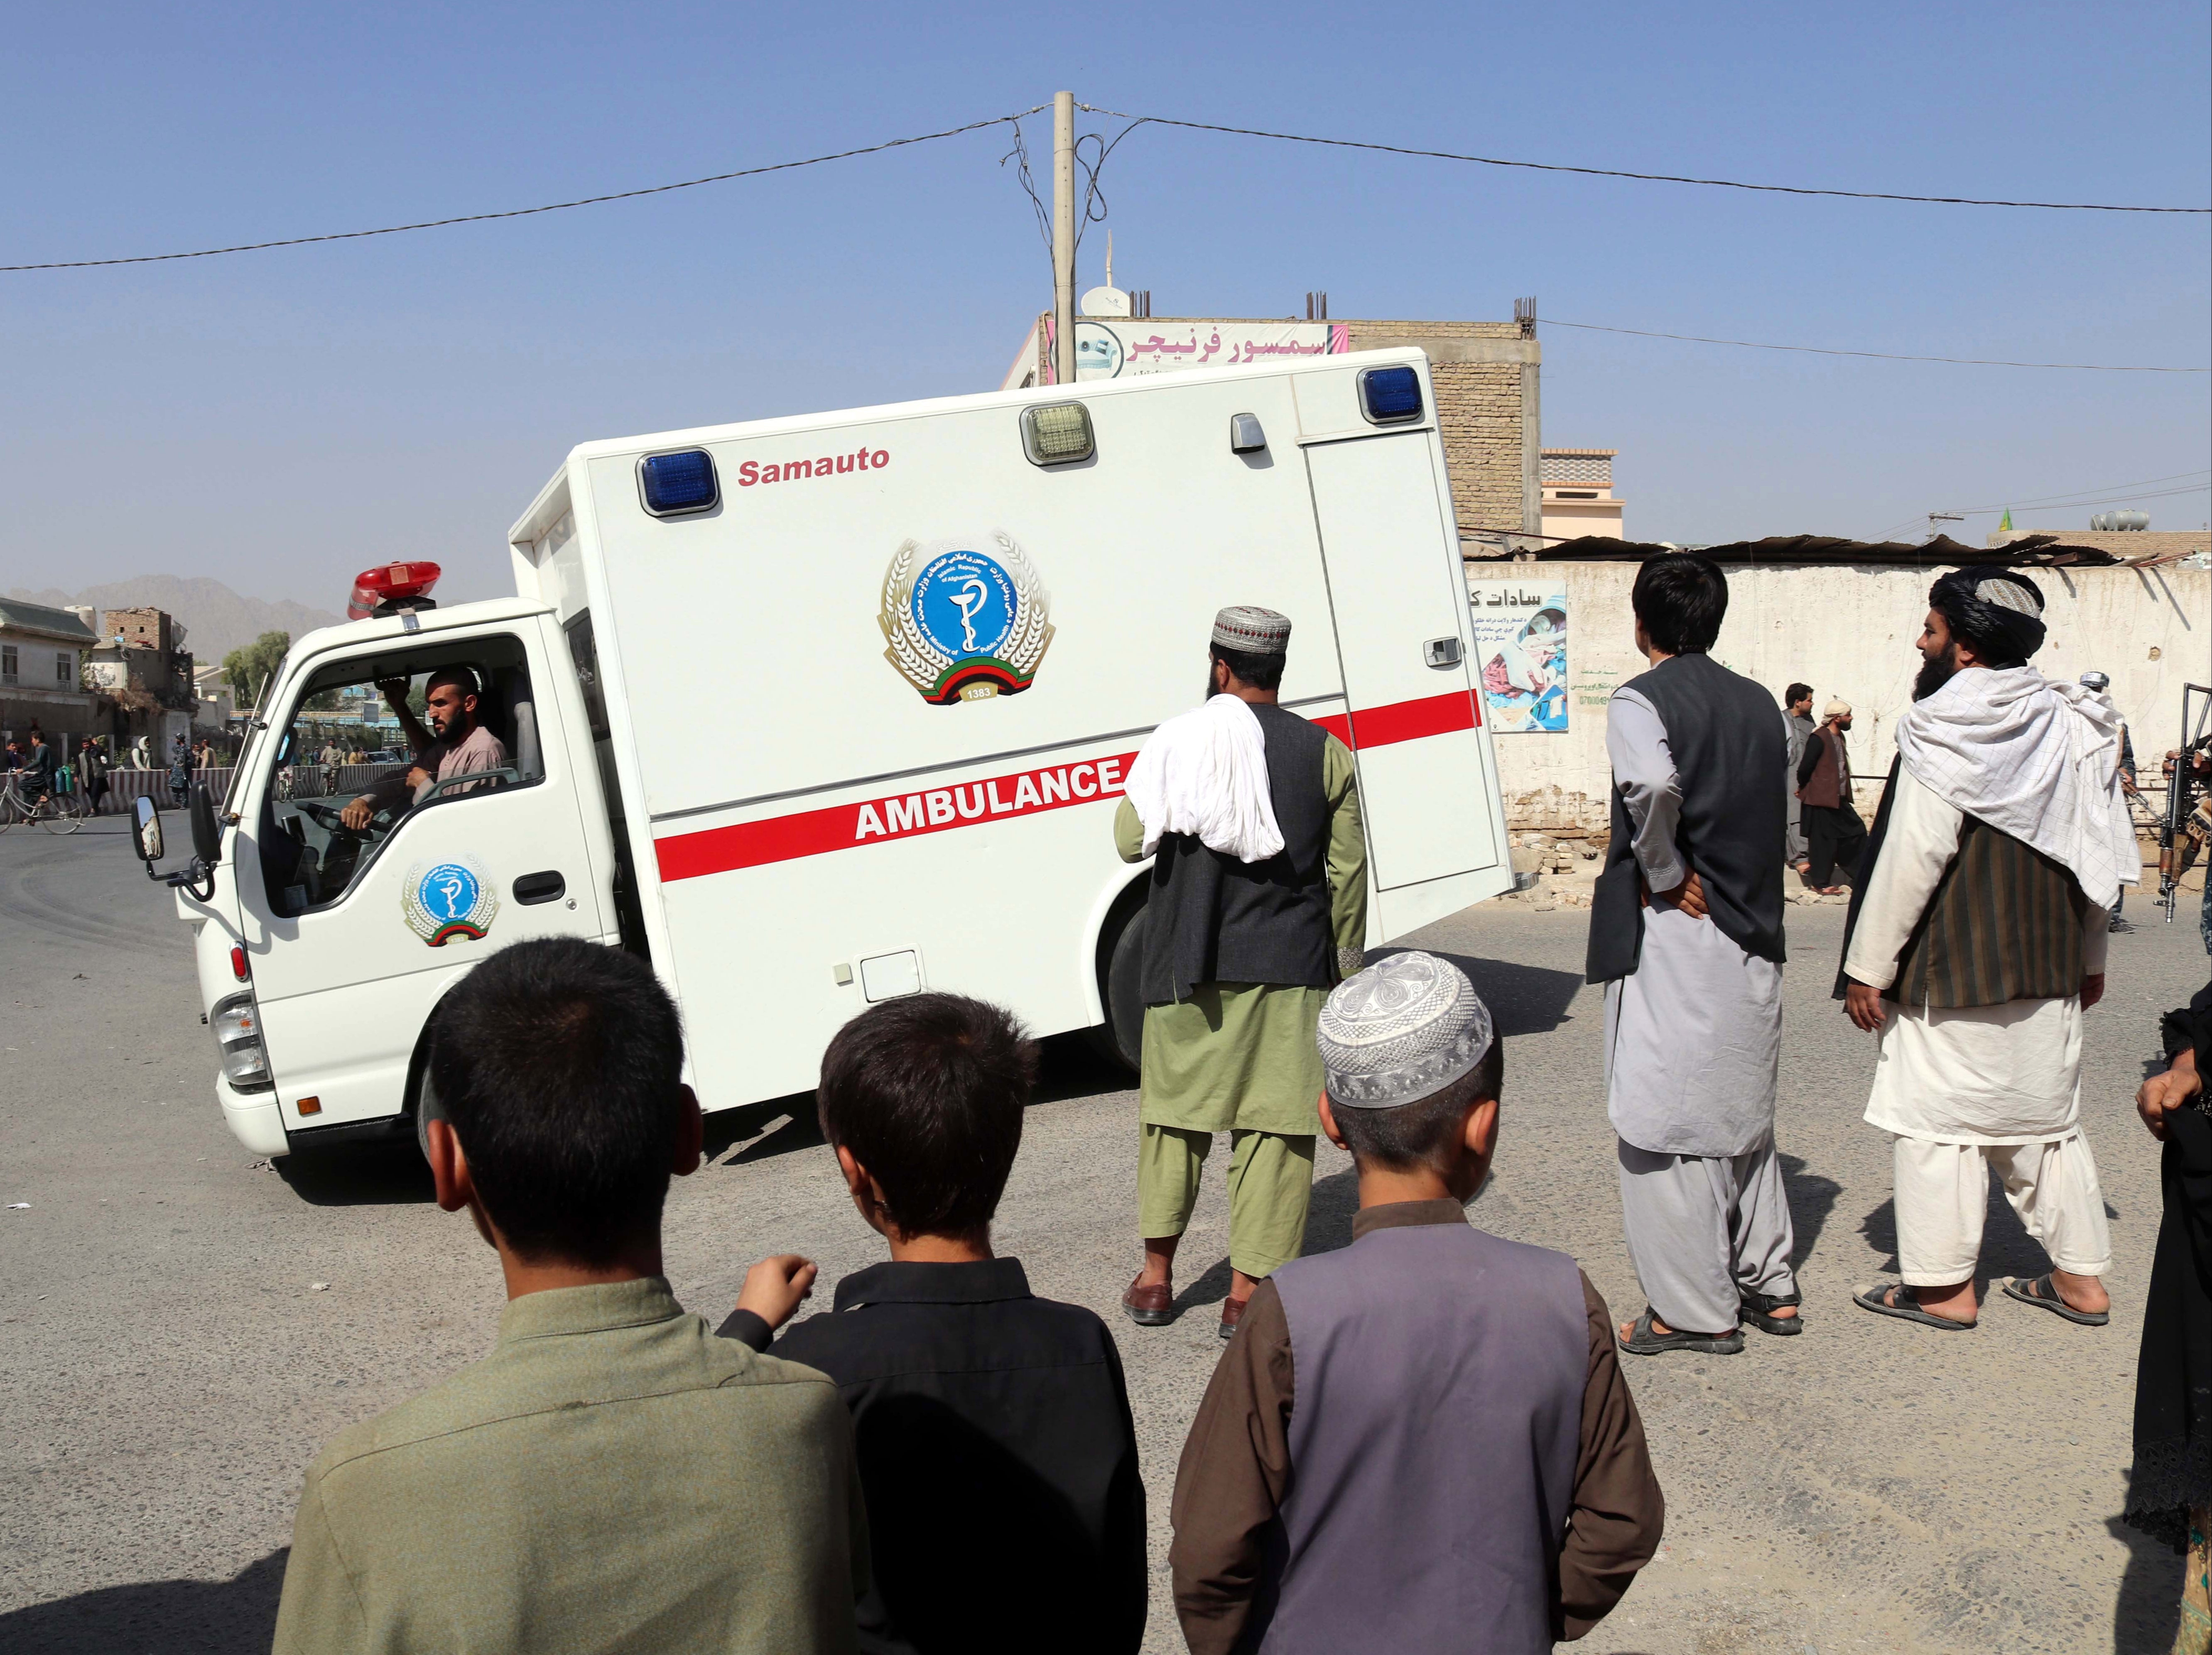 The wounded are taken to hospital after the blasts on Friday